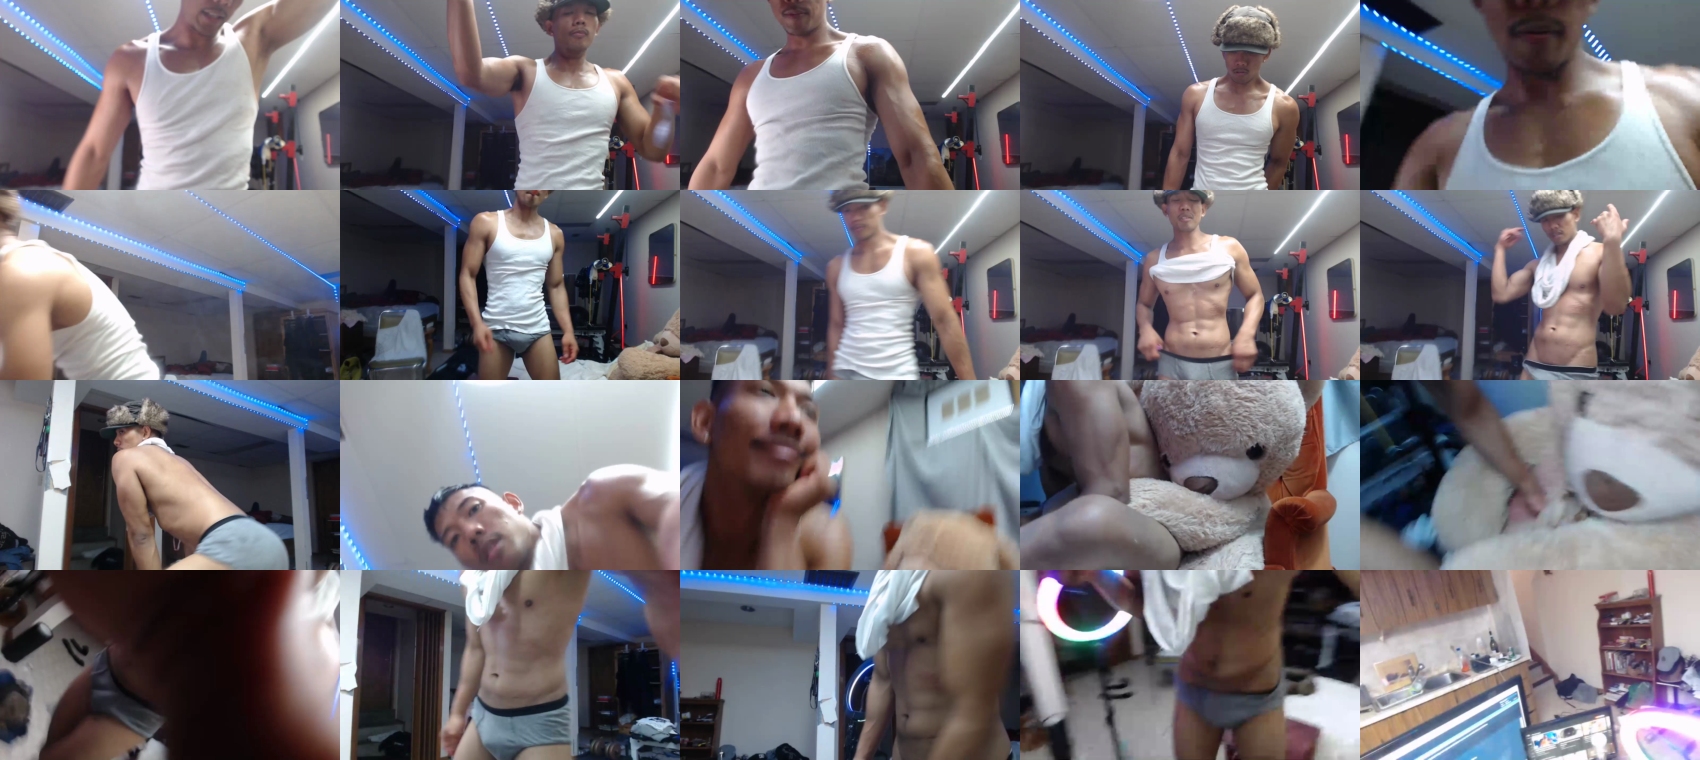 chadclouds  20-08-2022 Males striptease